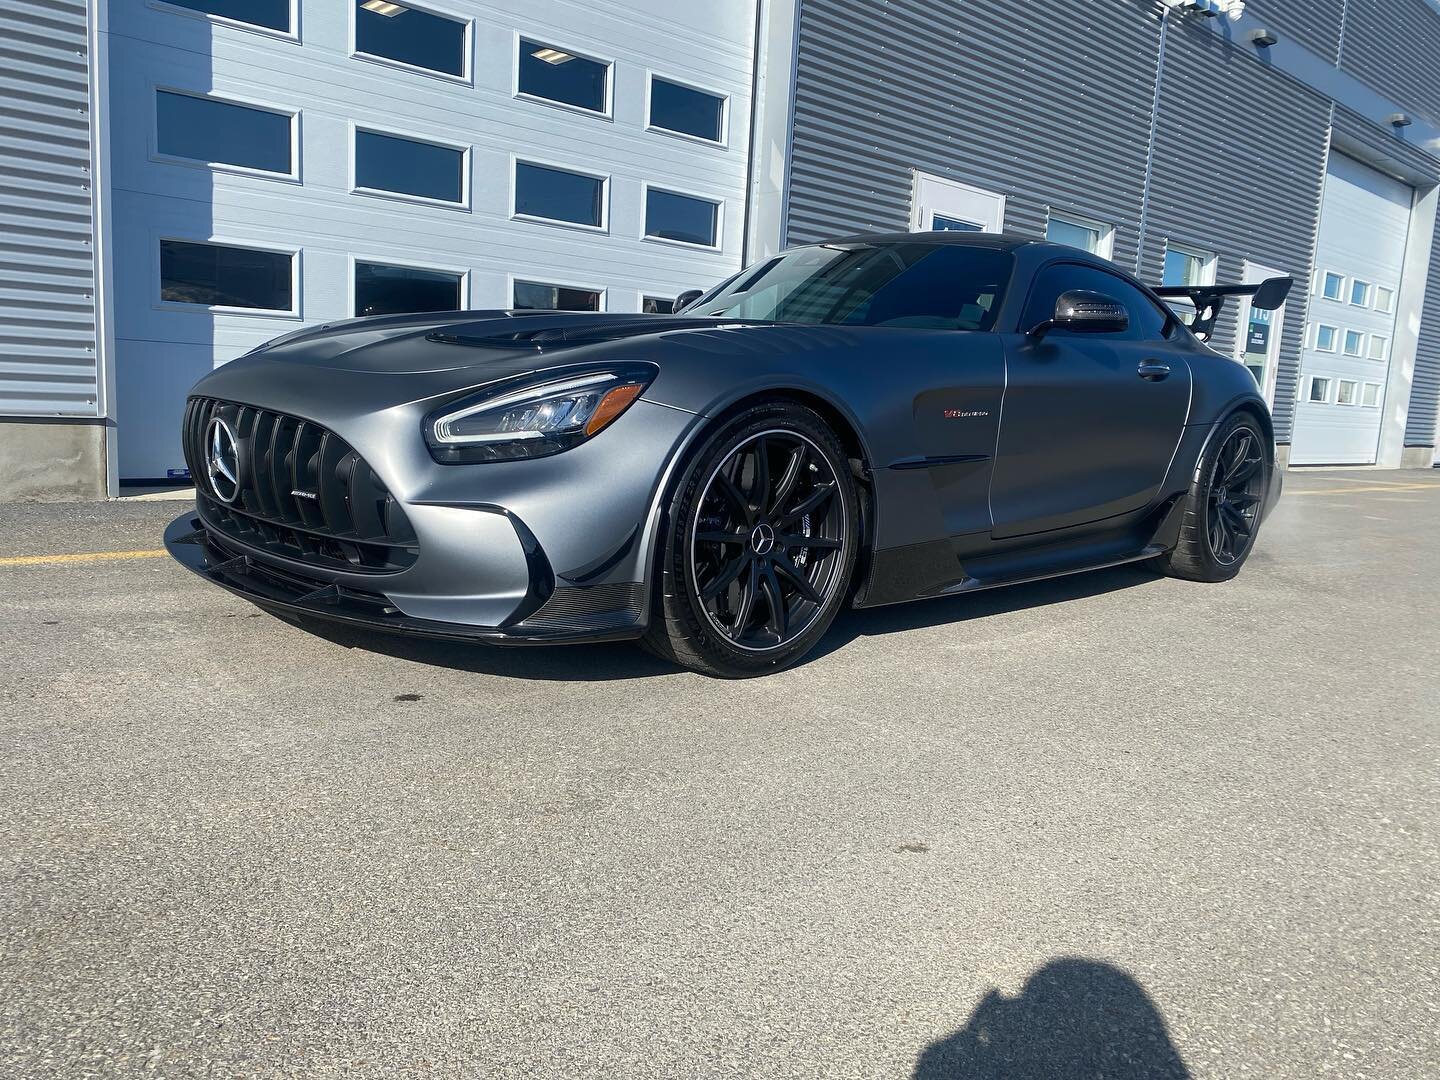 Taking this Mercedes AMG GT Black Series to the next level with a full body Stealth Paint Protection Film, ceramic coating, and our ceramic heat control window film for ultimate protection and style 🔥🏎️✨ #MercedesAMGGTBlackSeries #StealthPPF #Ceram